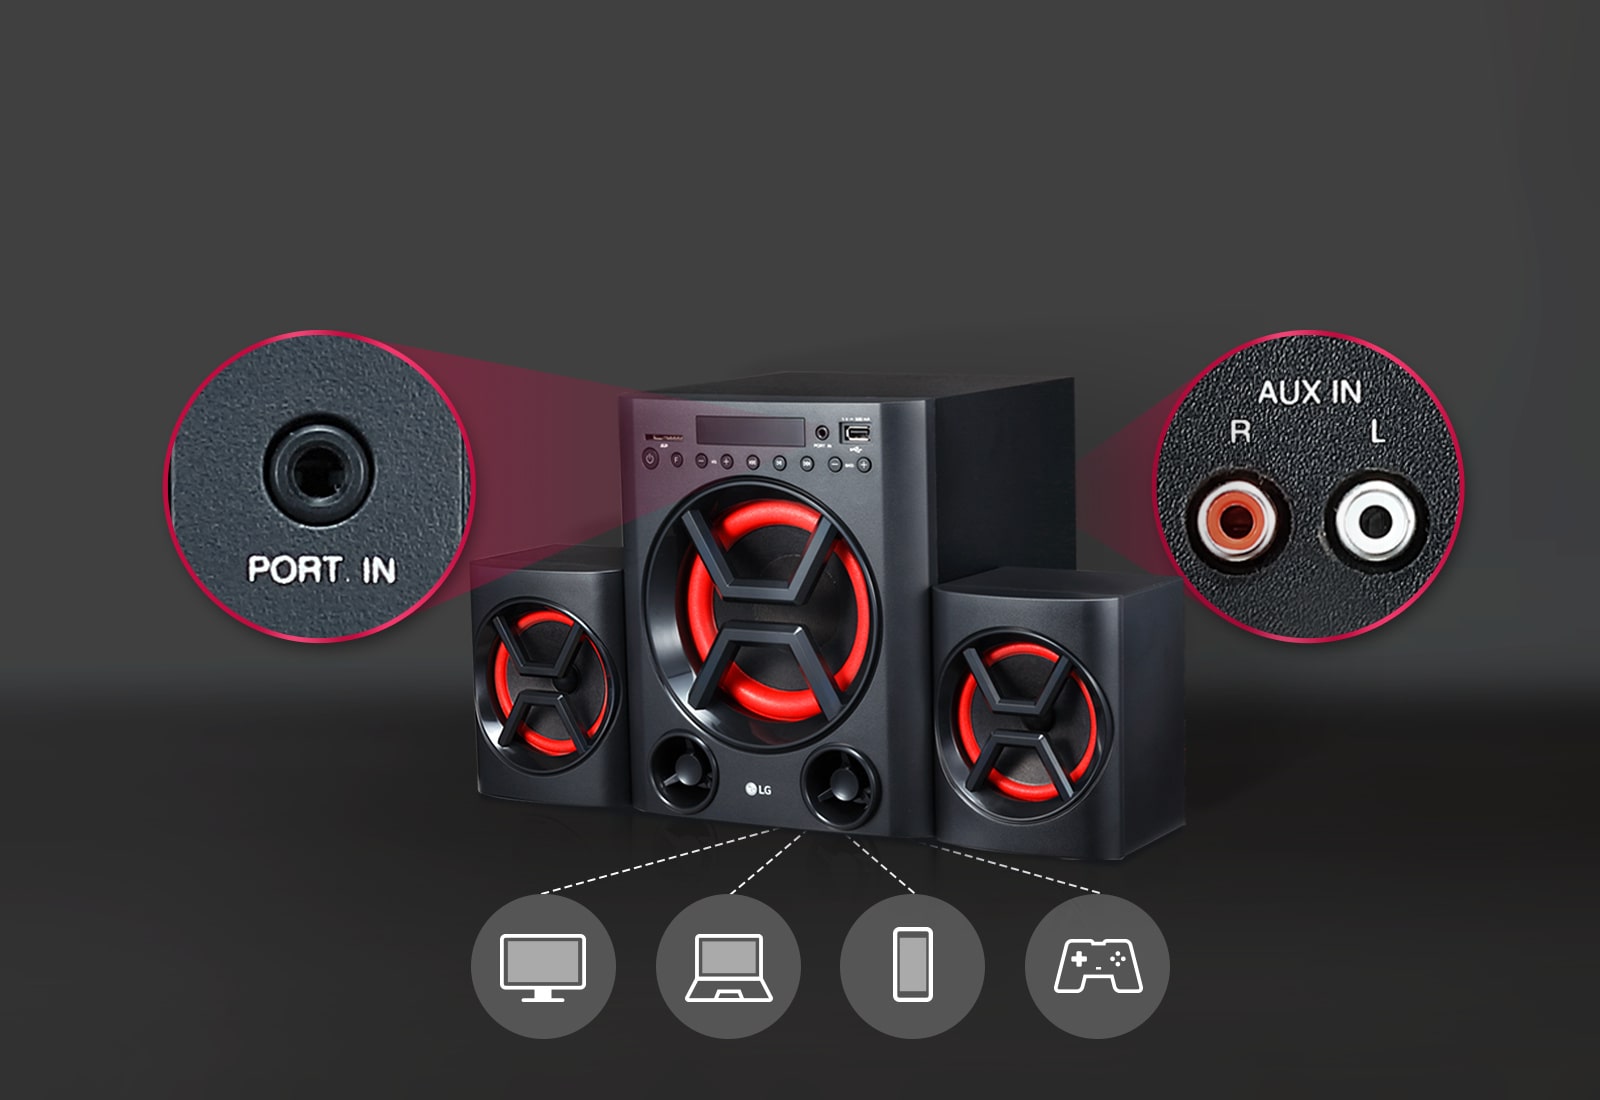 Port. In / Aux In1